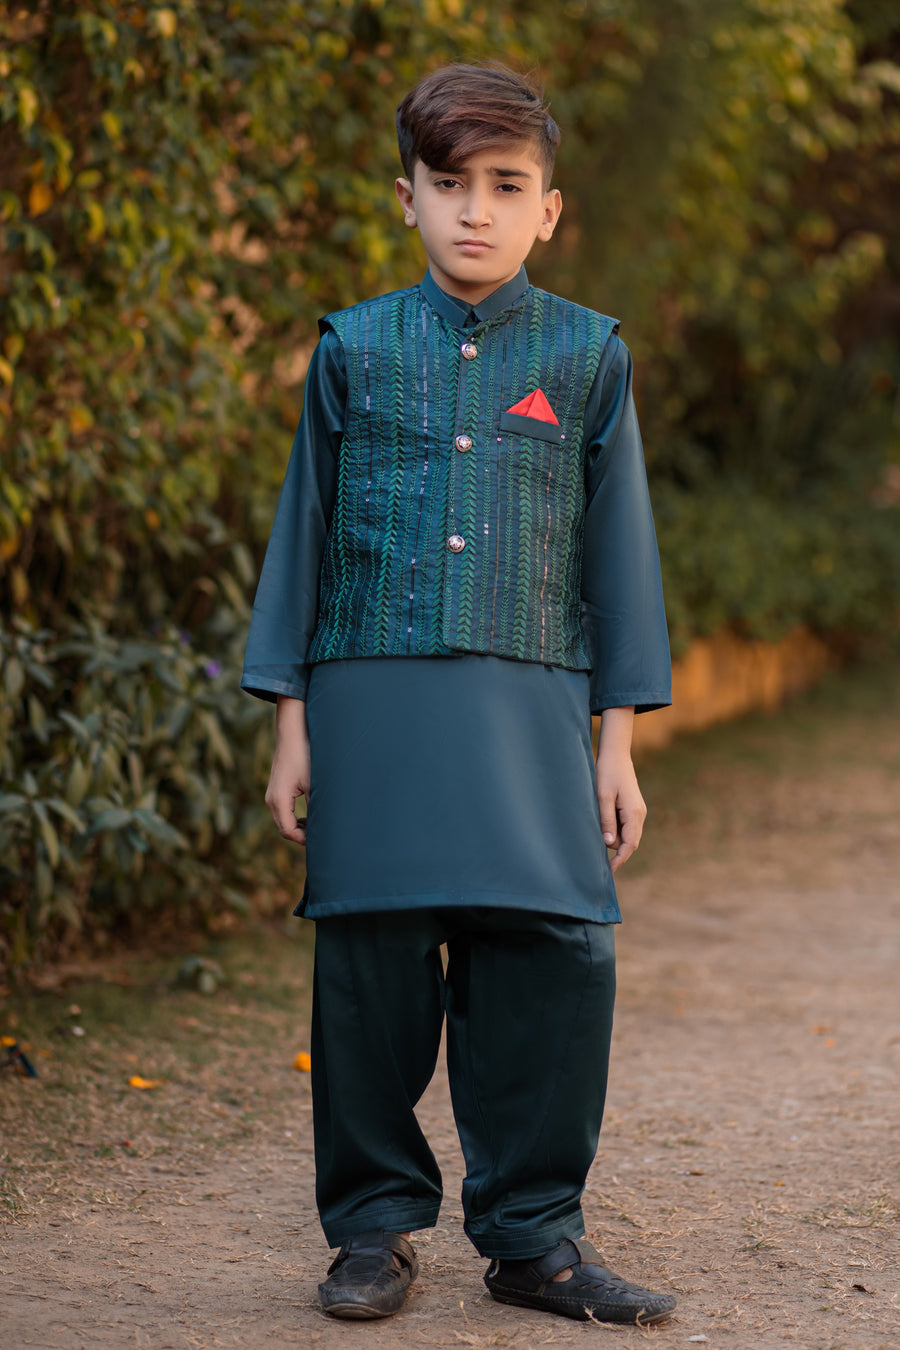 Blue Dianne Boys Waistcoat suits- Areeba's Couture